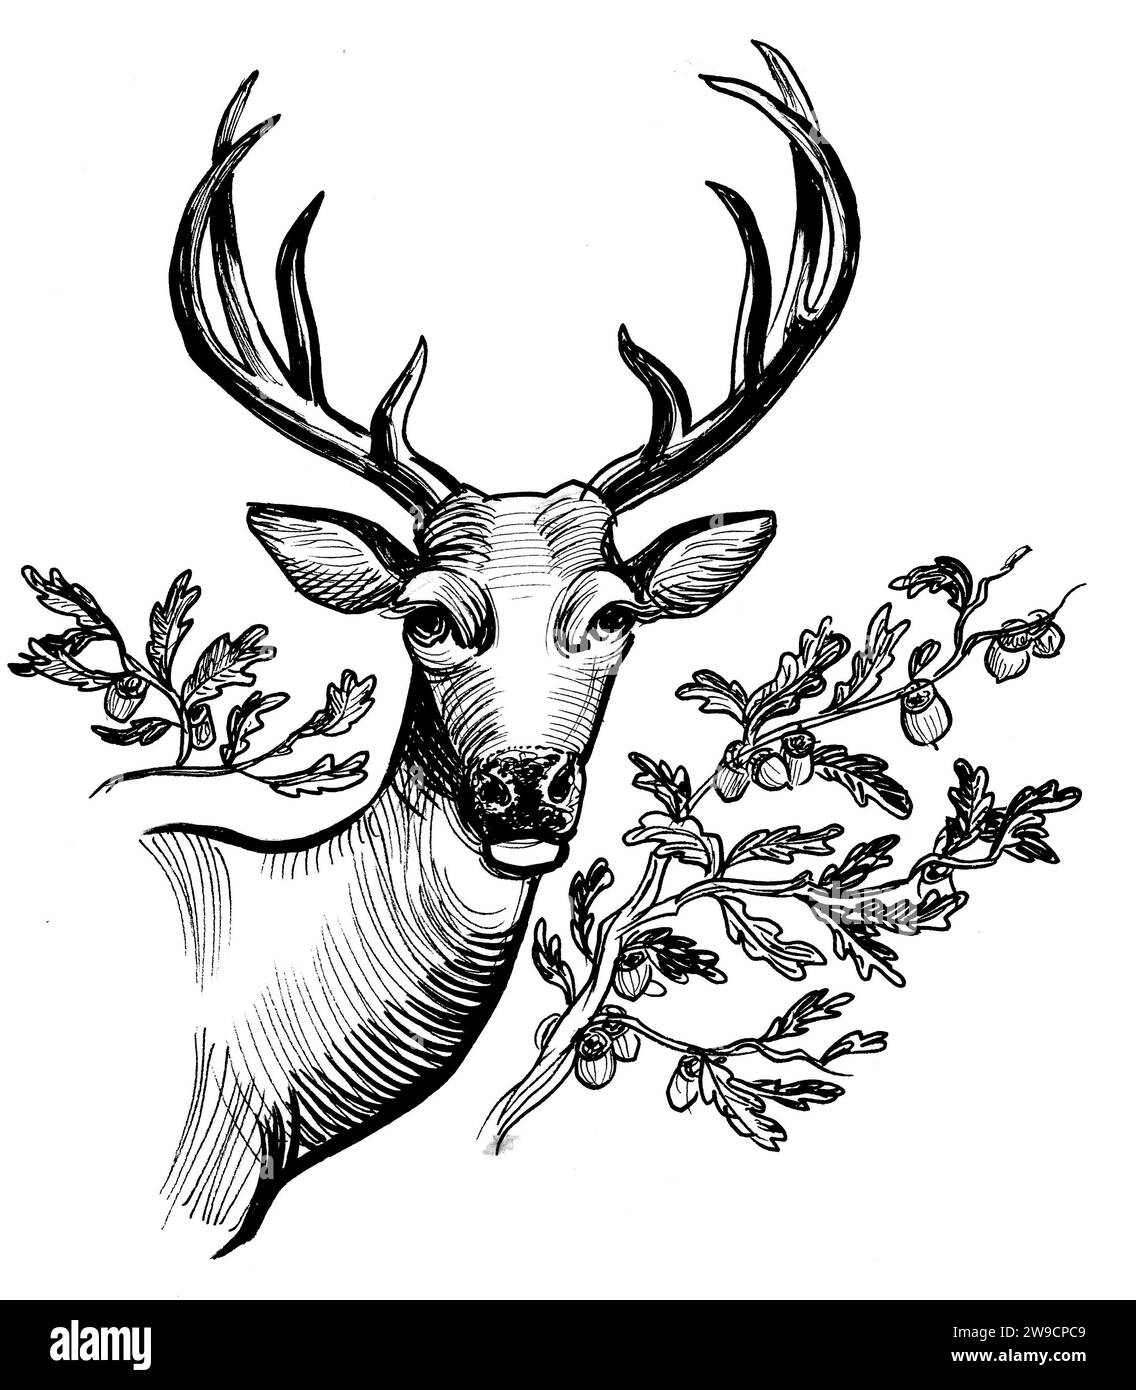 Deer head. Ink black and white drawing Stock Photo